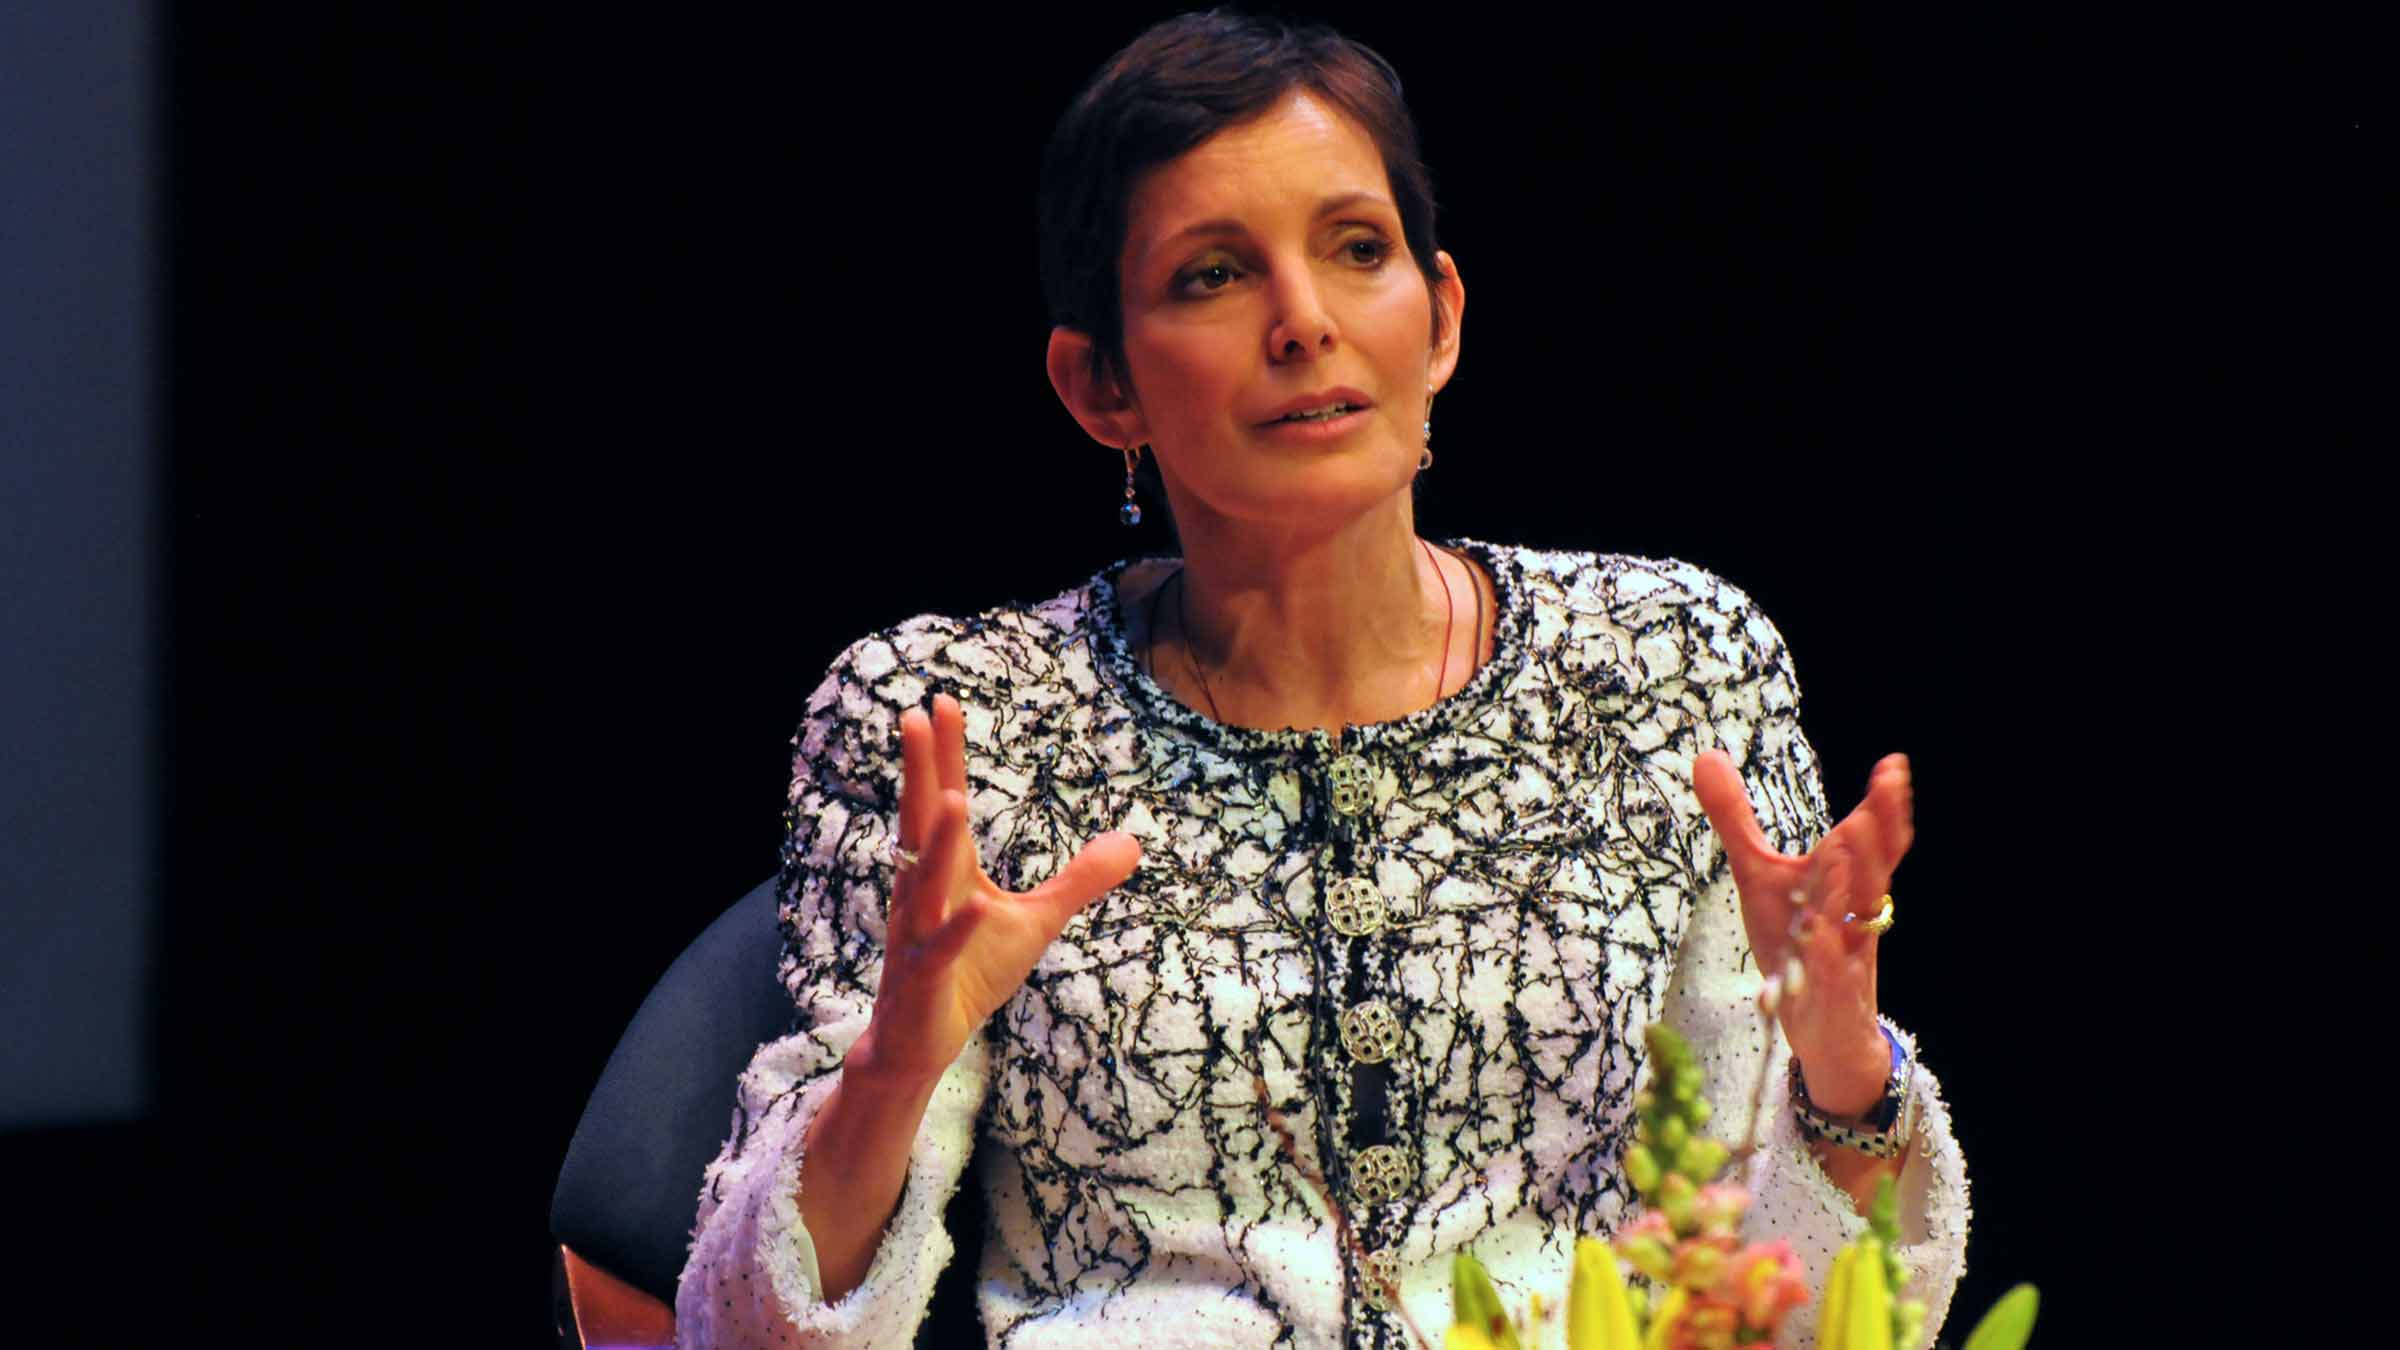 Maureen Chiquet’s talk at The New York Times International Luxury Conference